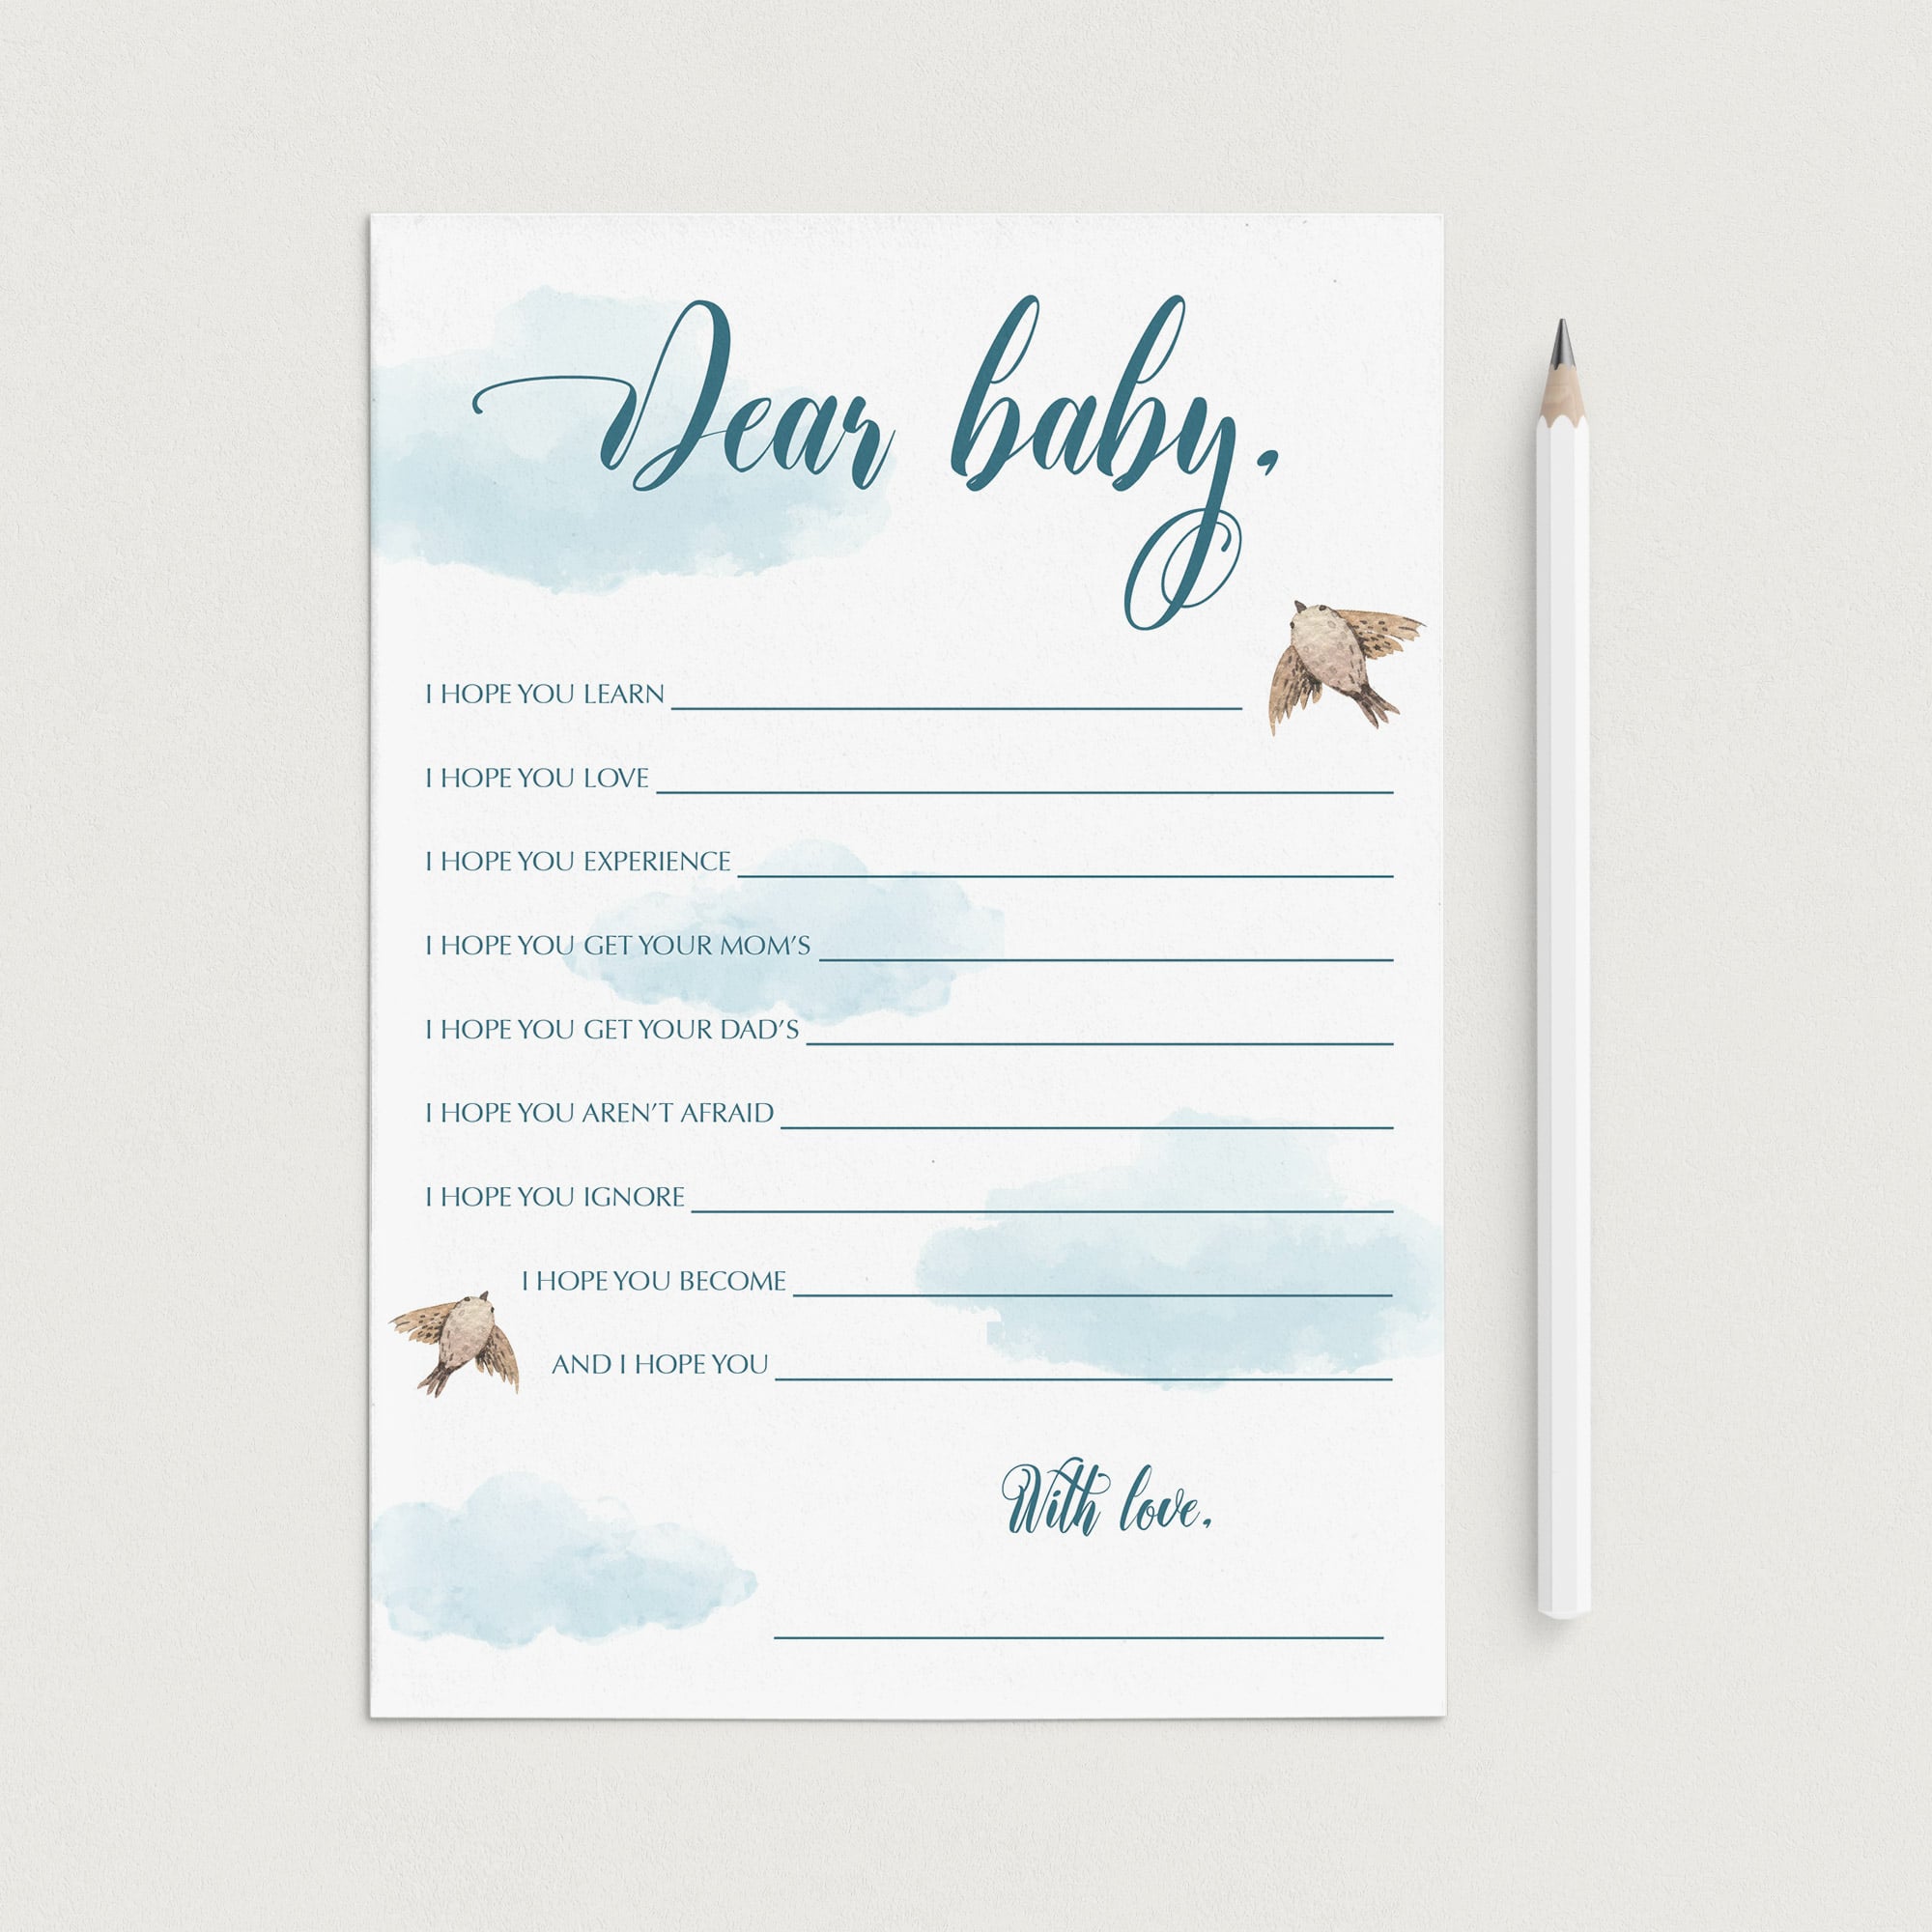 Dear baby card cloud baby shower printable by LittleSizzle